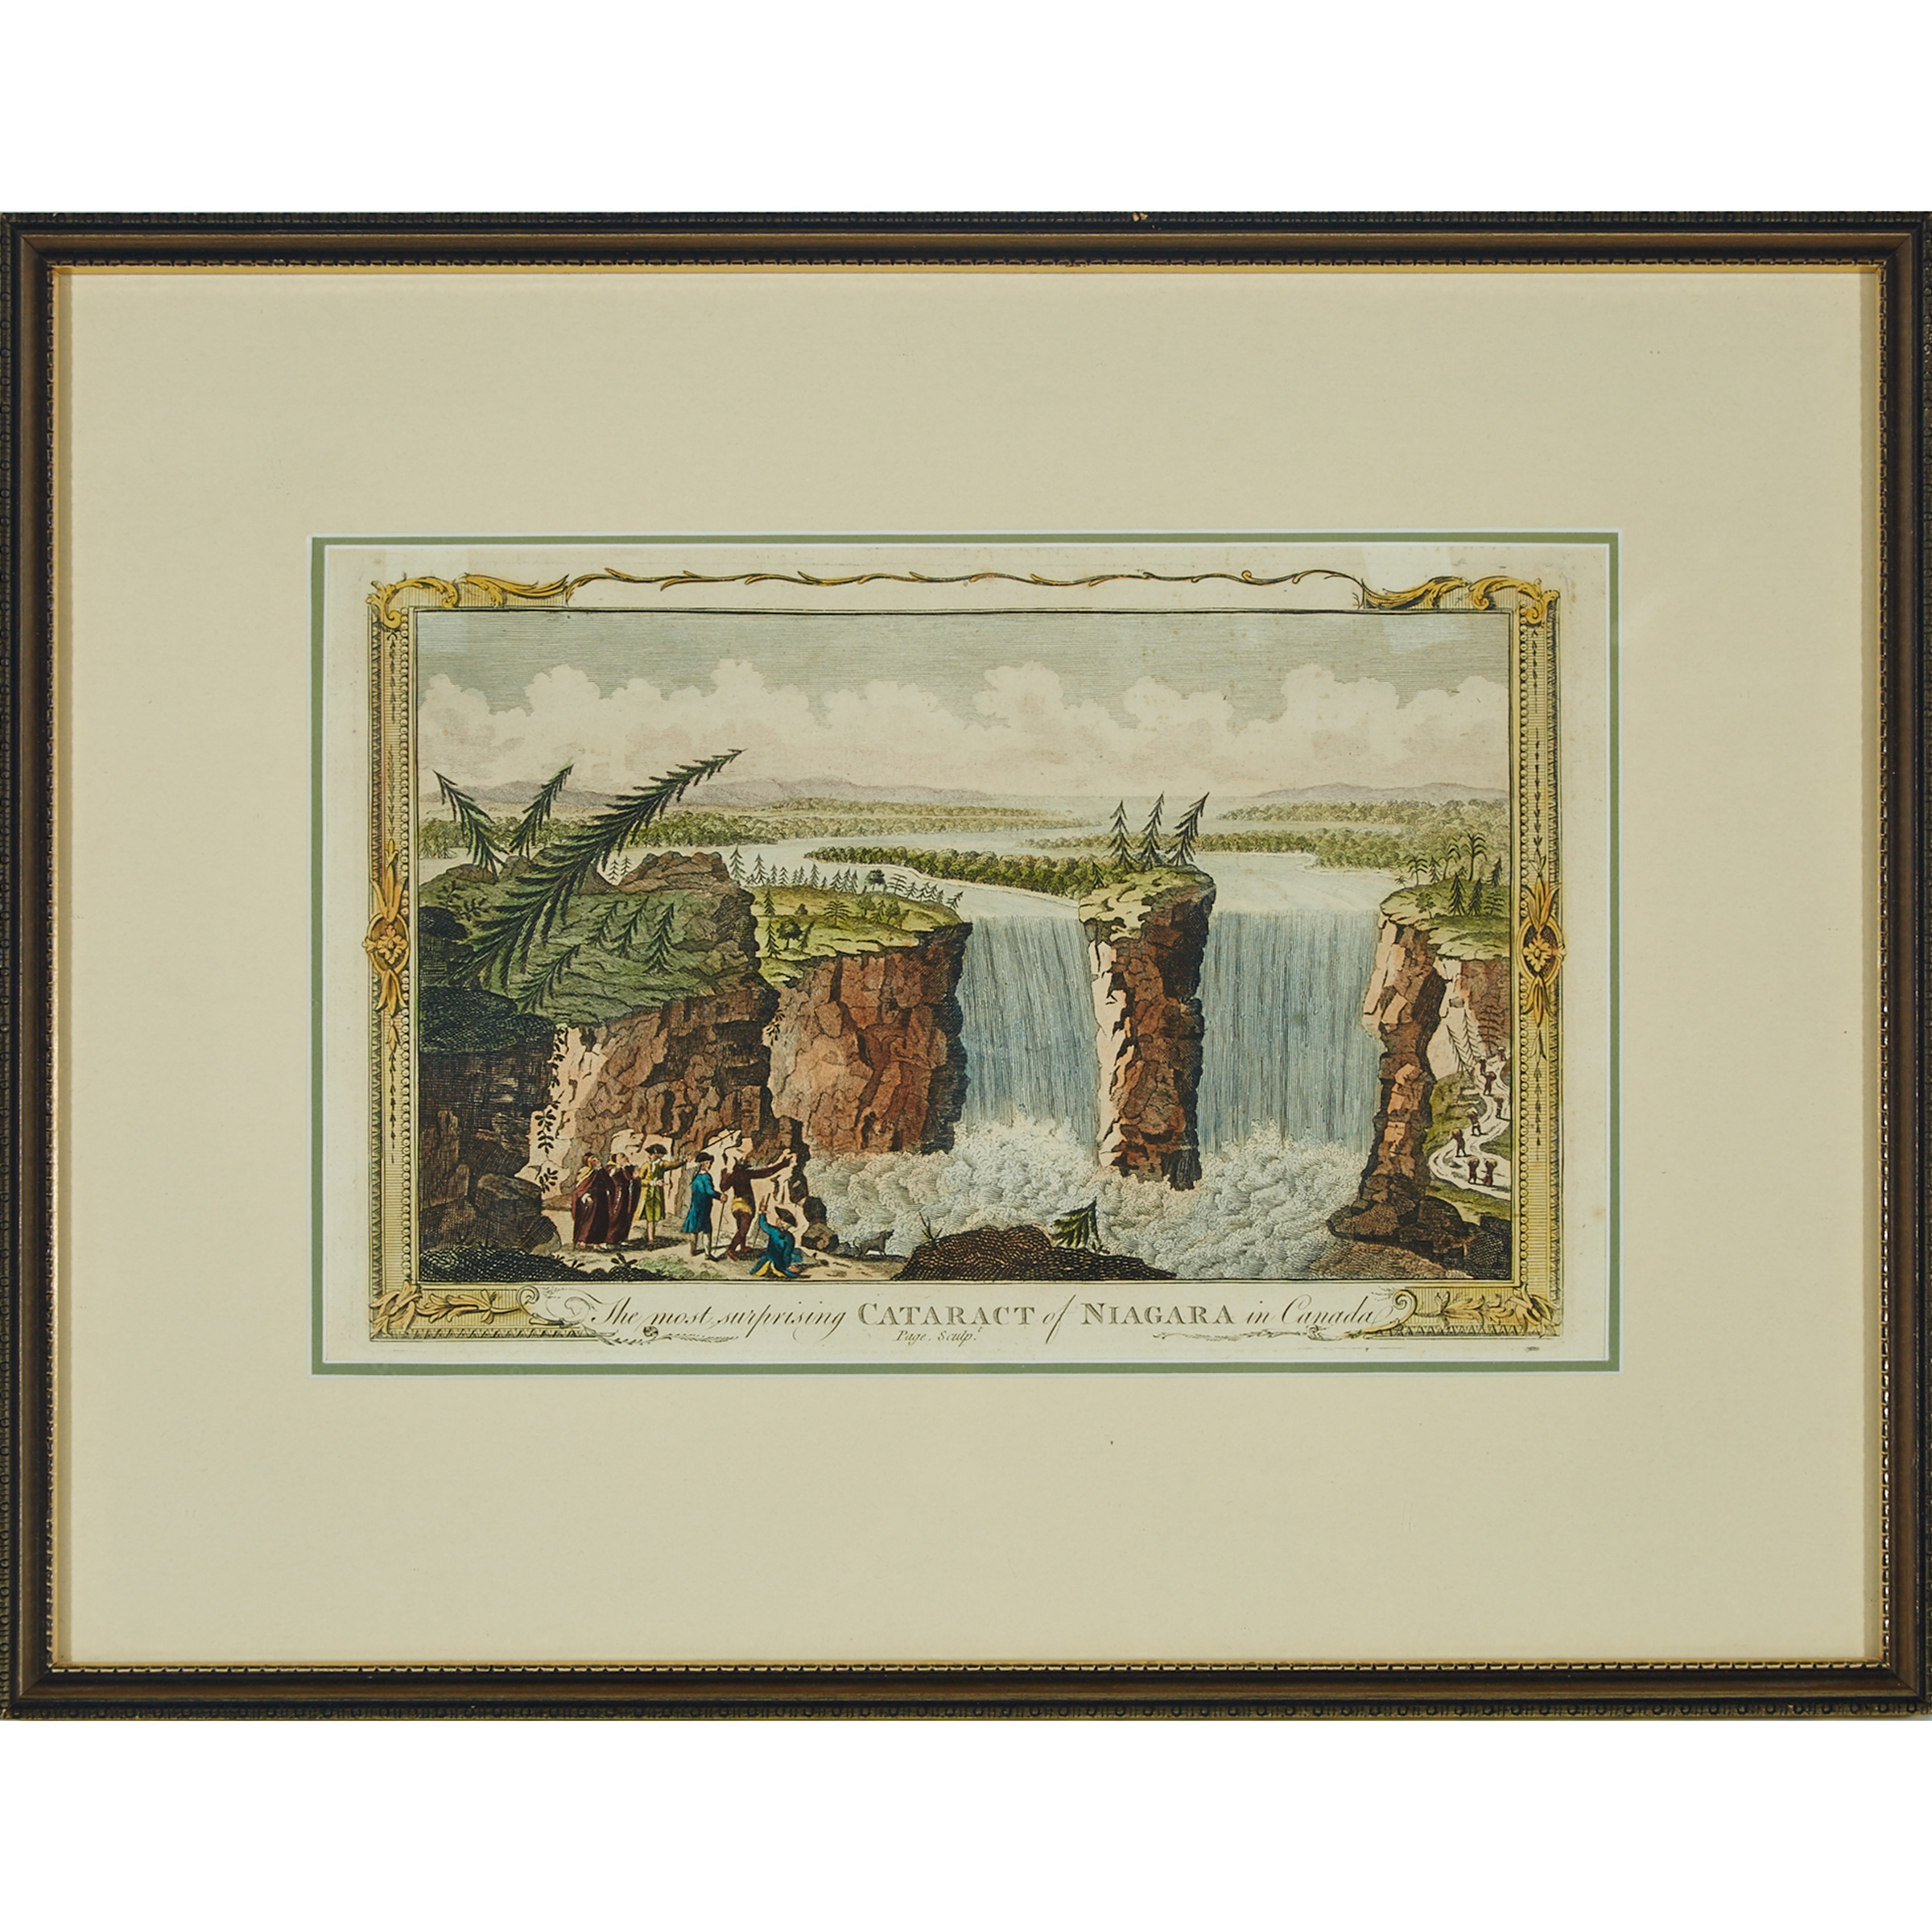 ‘The Most Surprising Cataract of Niagara Canada’, after Father Hennepin and Peter Kalm, early 19th century